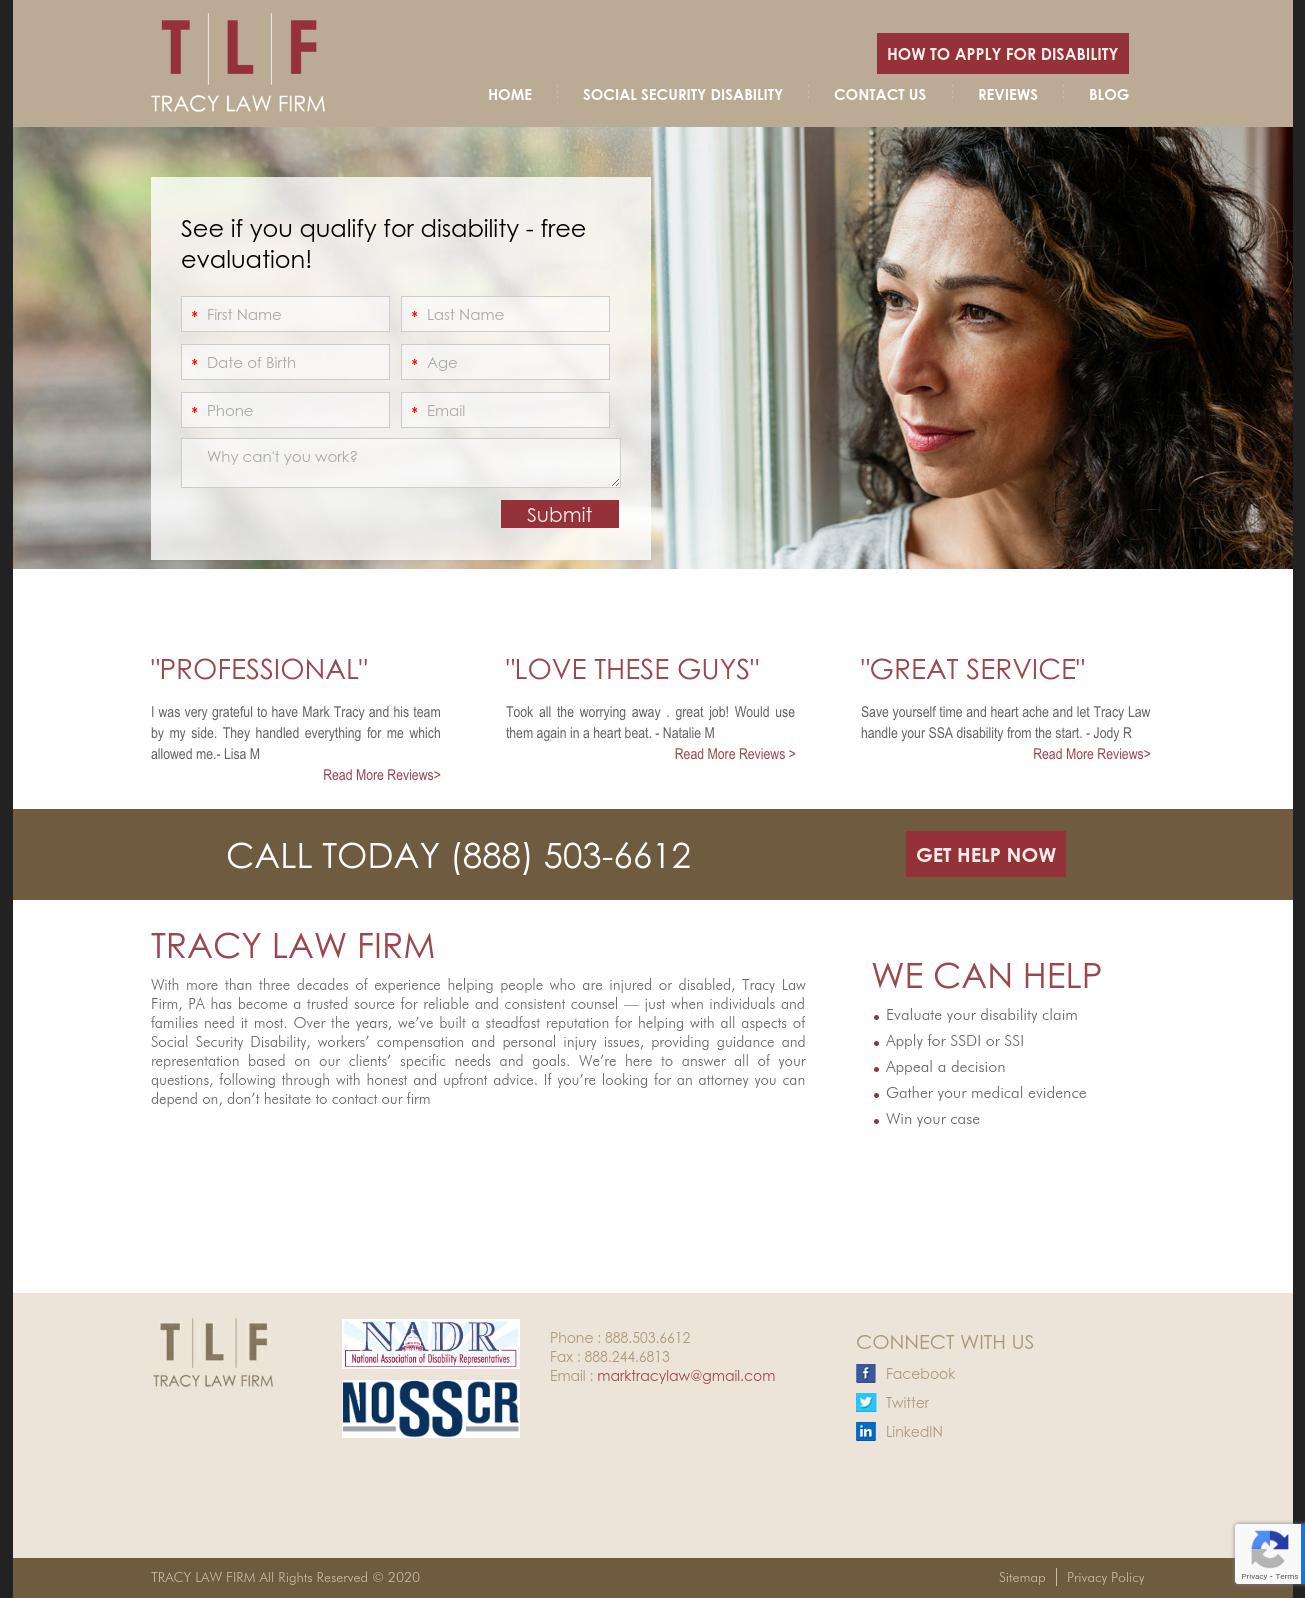 Tracy Law Firm - St. Paul MN Lawyers